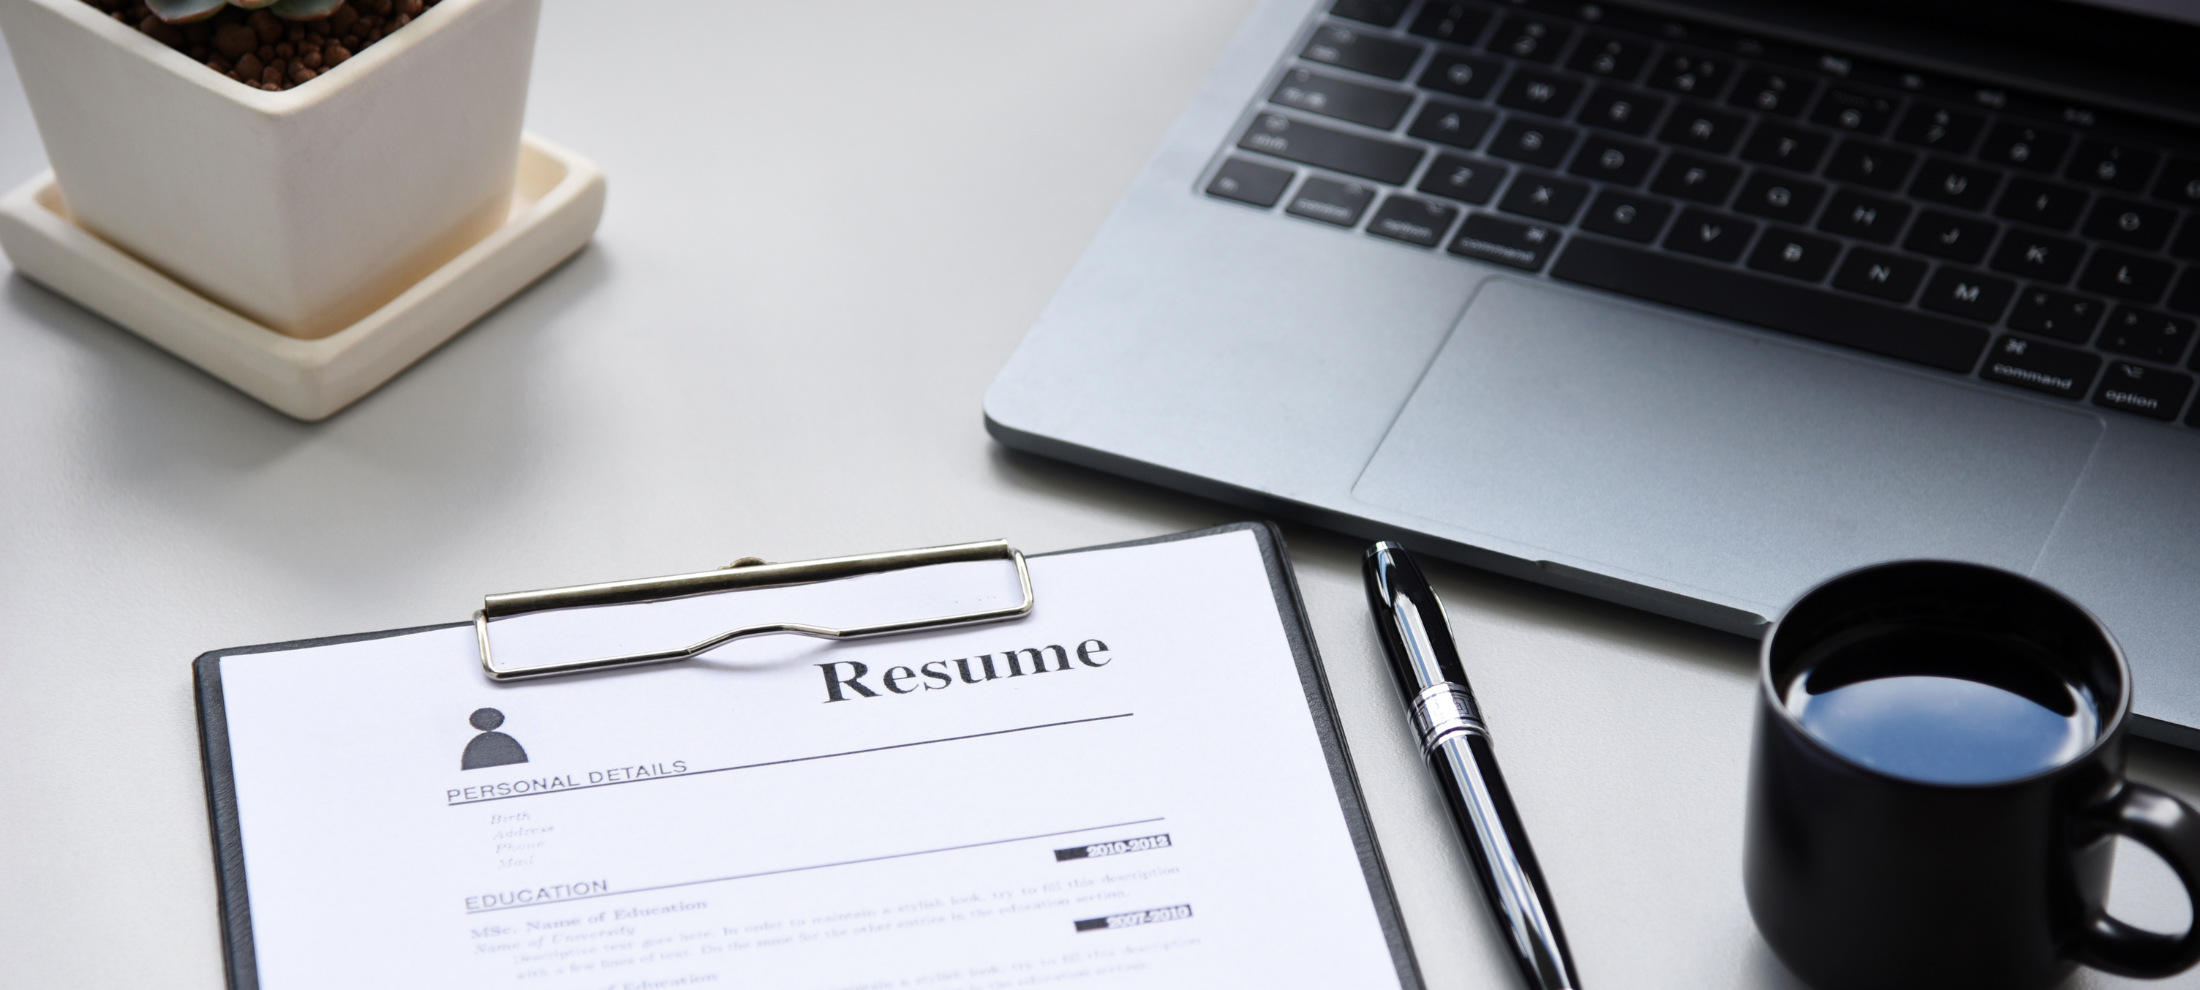 What is a job requisition?